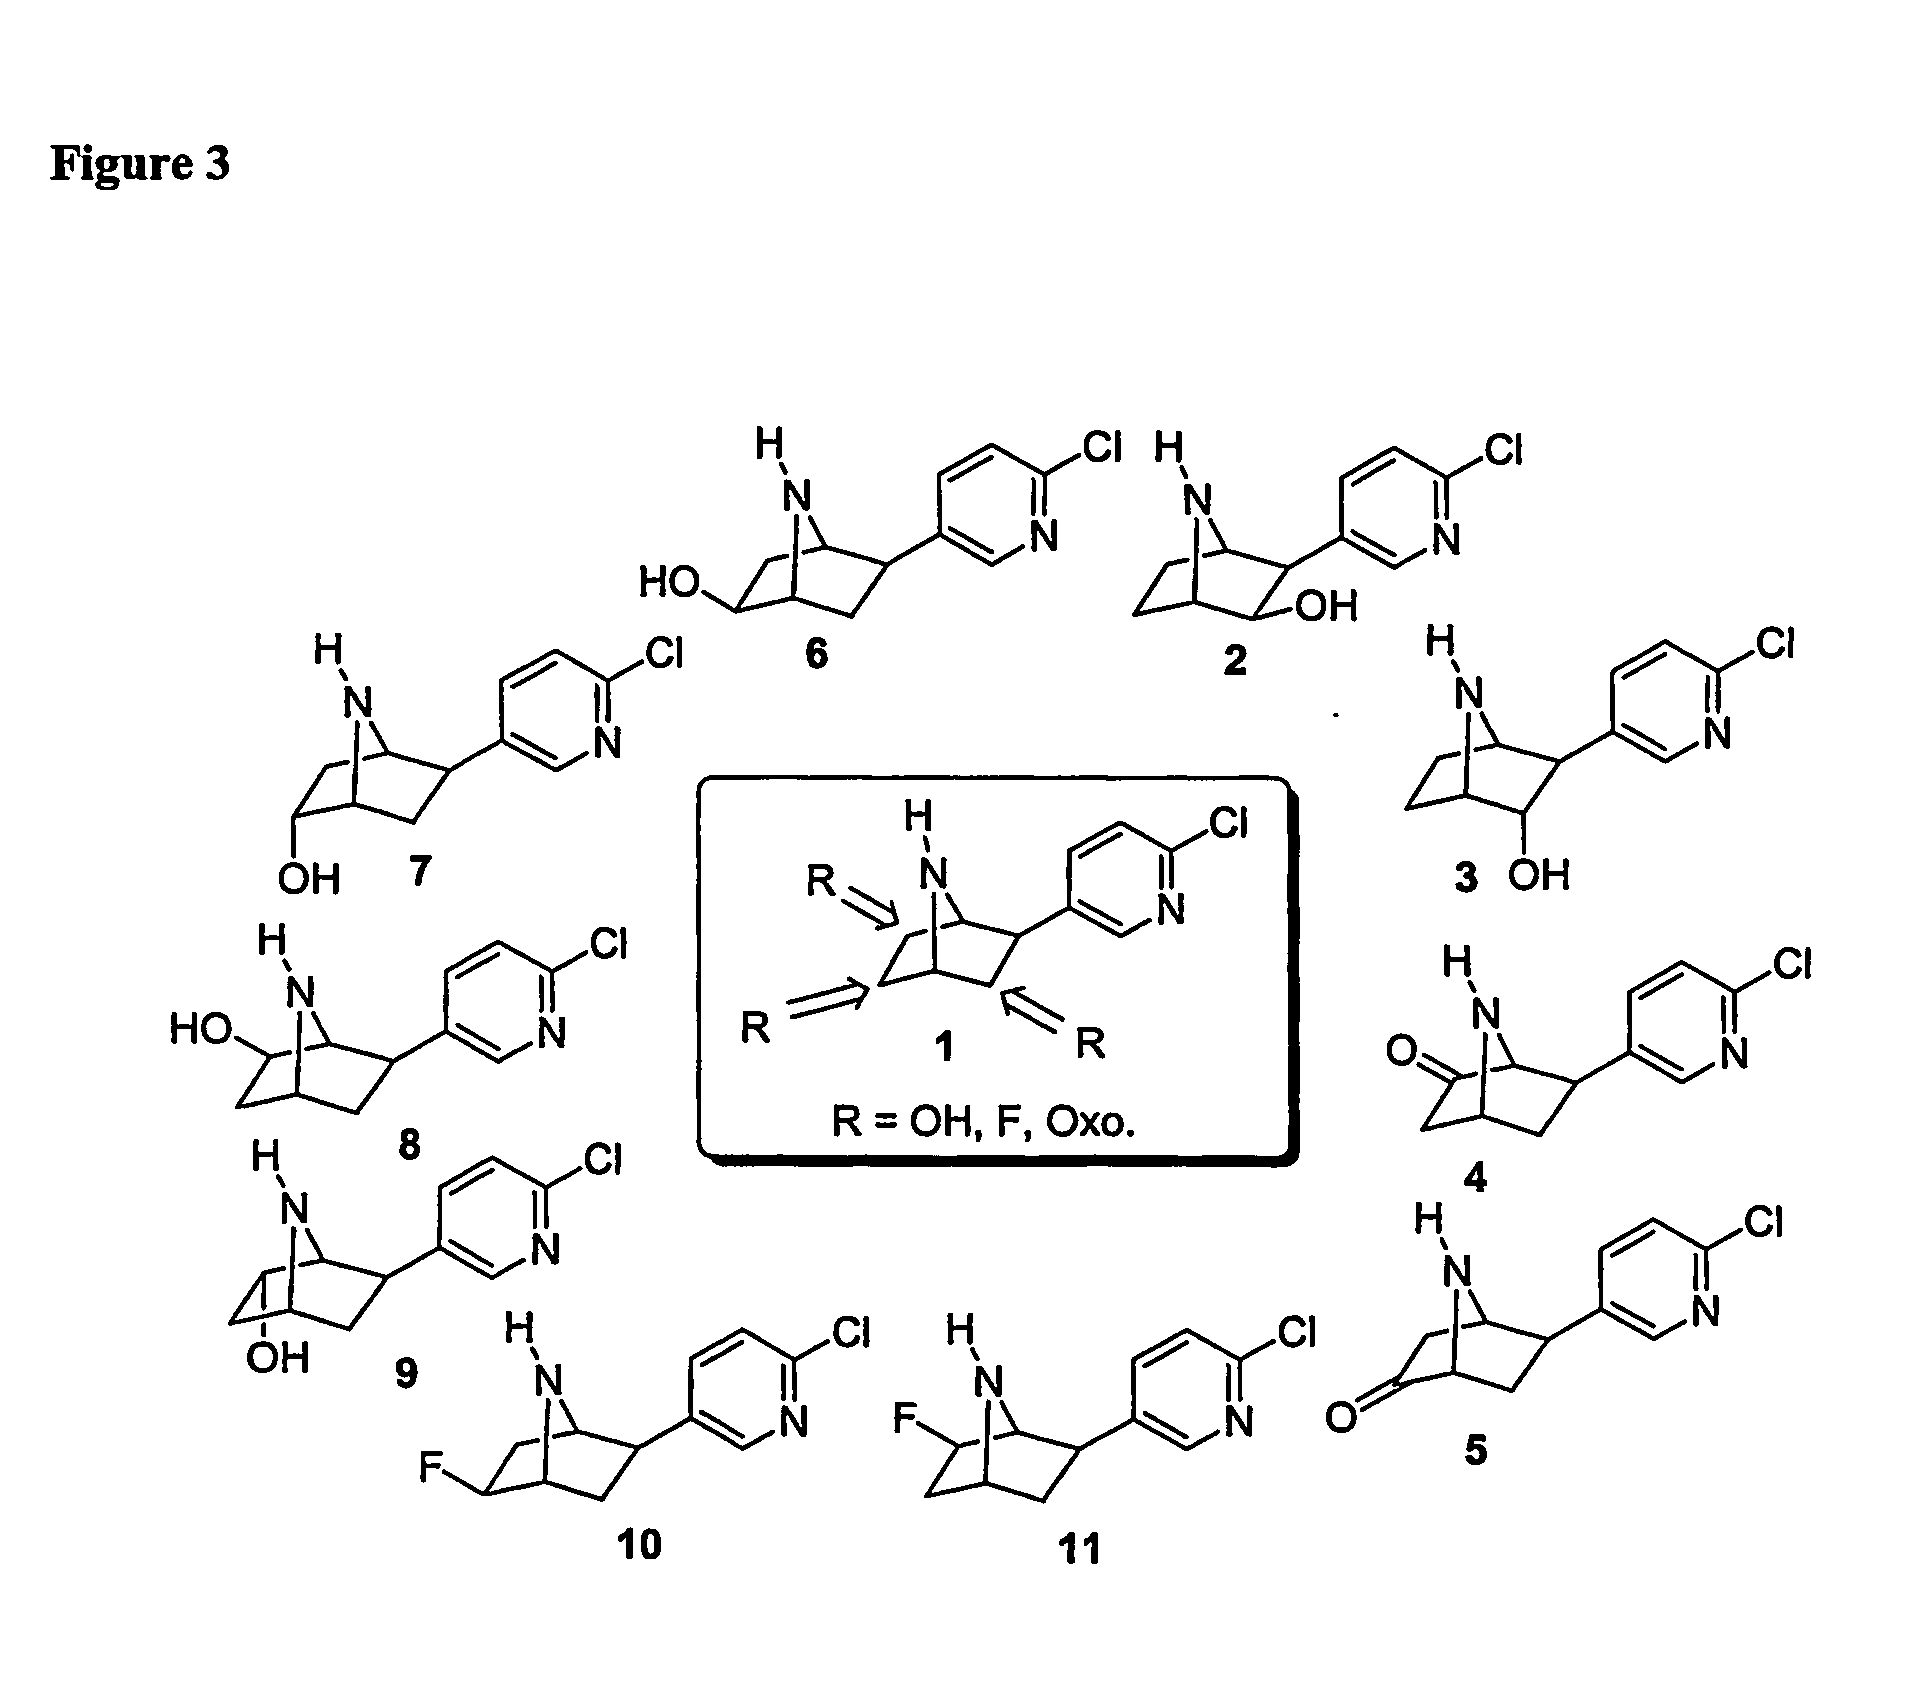 Ligands for Nicotinic Acetylcholine Receptors, and Methods of Making and Using Them